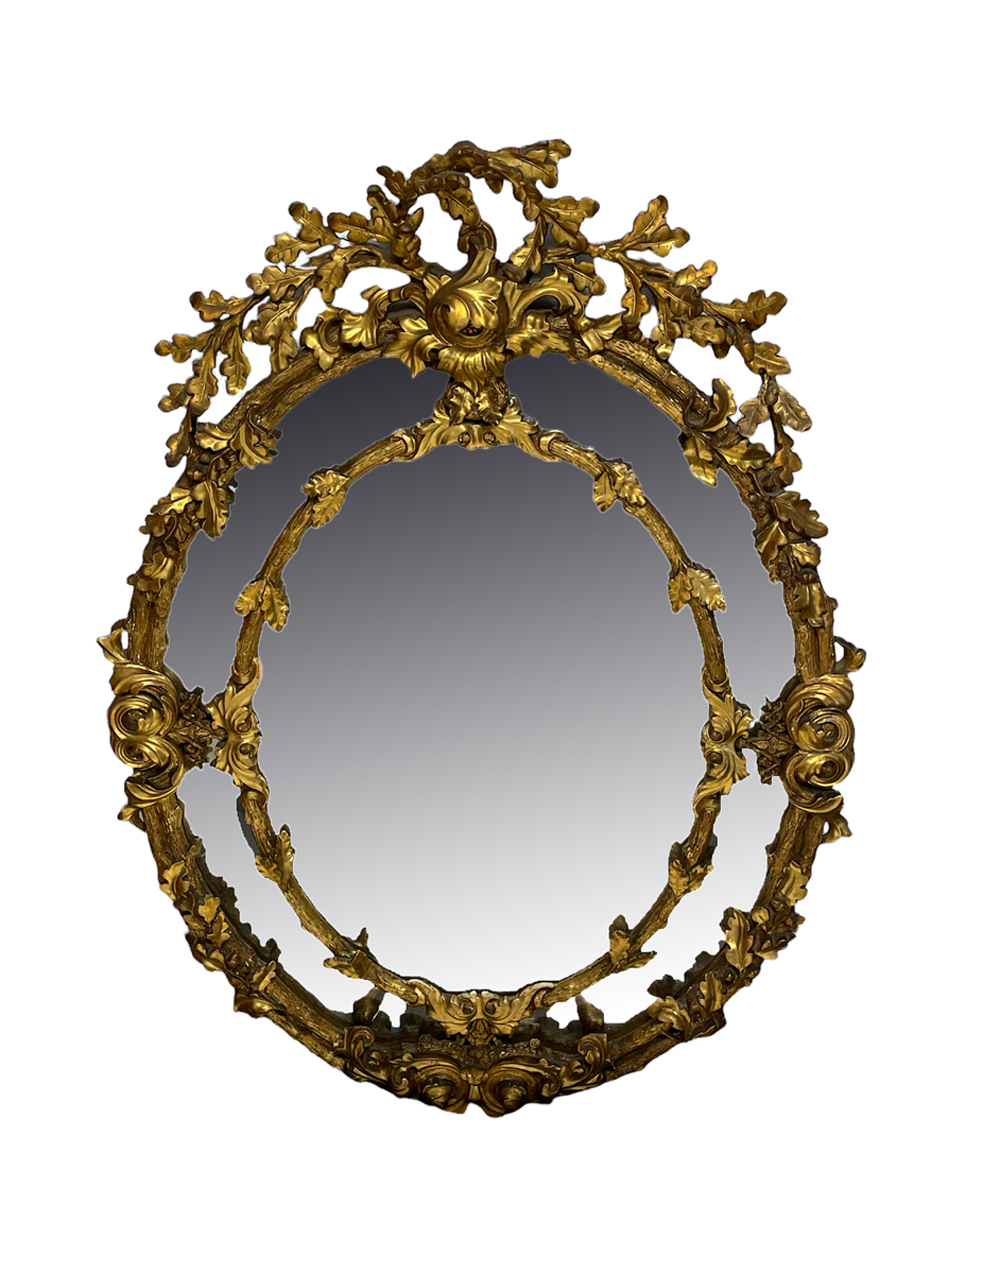 ITALIAN CARVED & GILDED GESSO MIRROR: